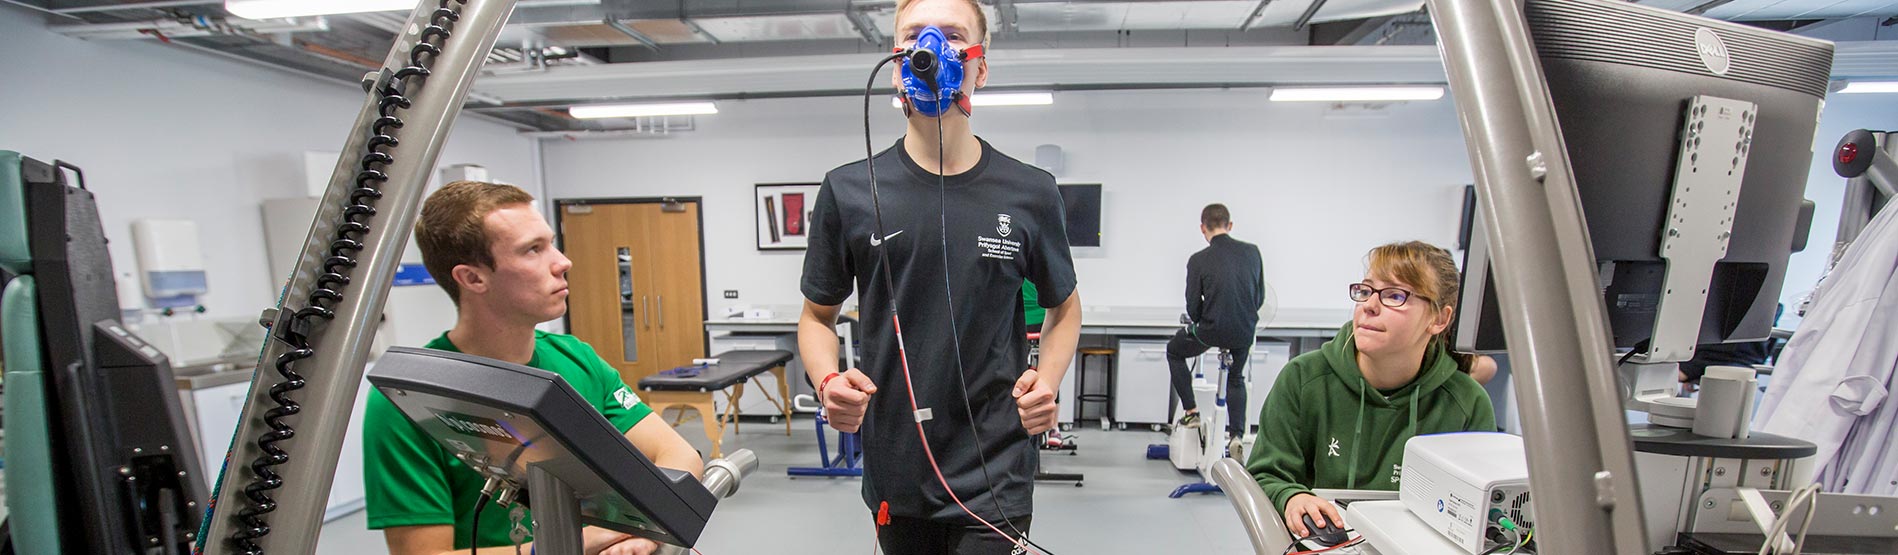 Sport science students and equipment 